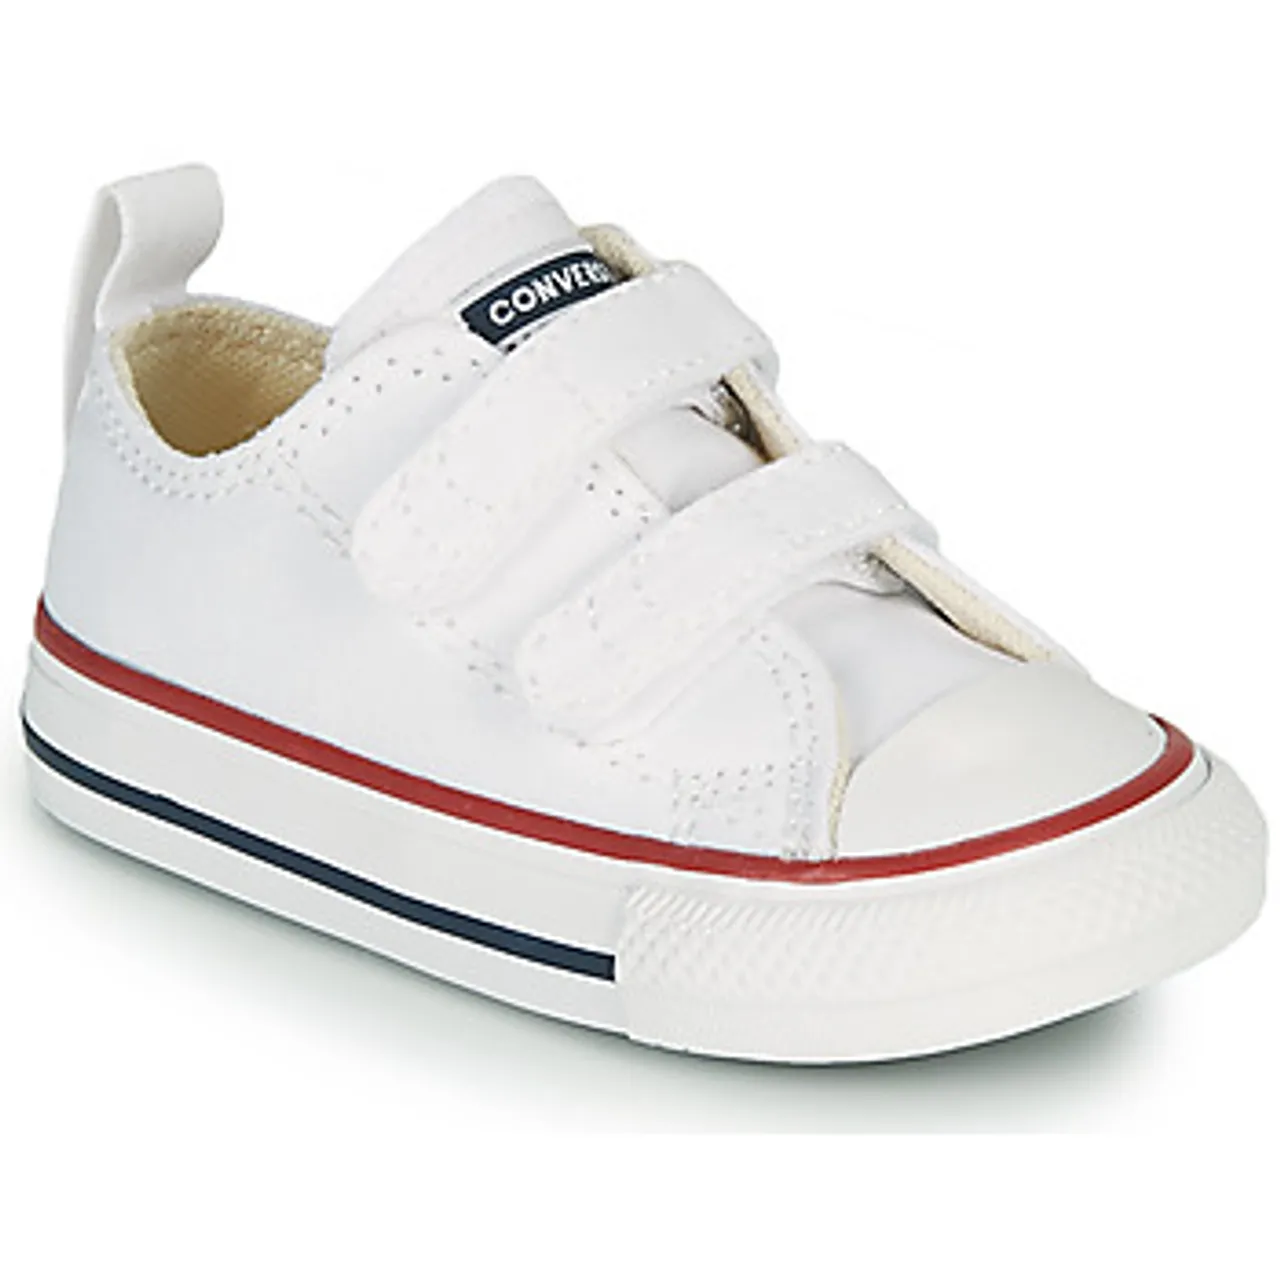 Converse  CHUCK TAYLOR ALL STAR 2V FOUNDATION OX  boys's Children's Shoes (Trainers) in White